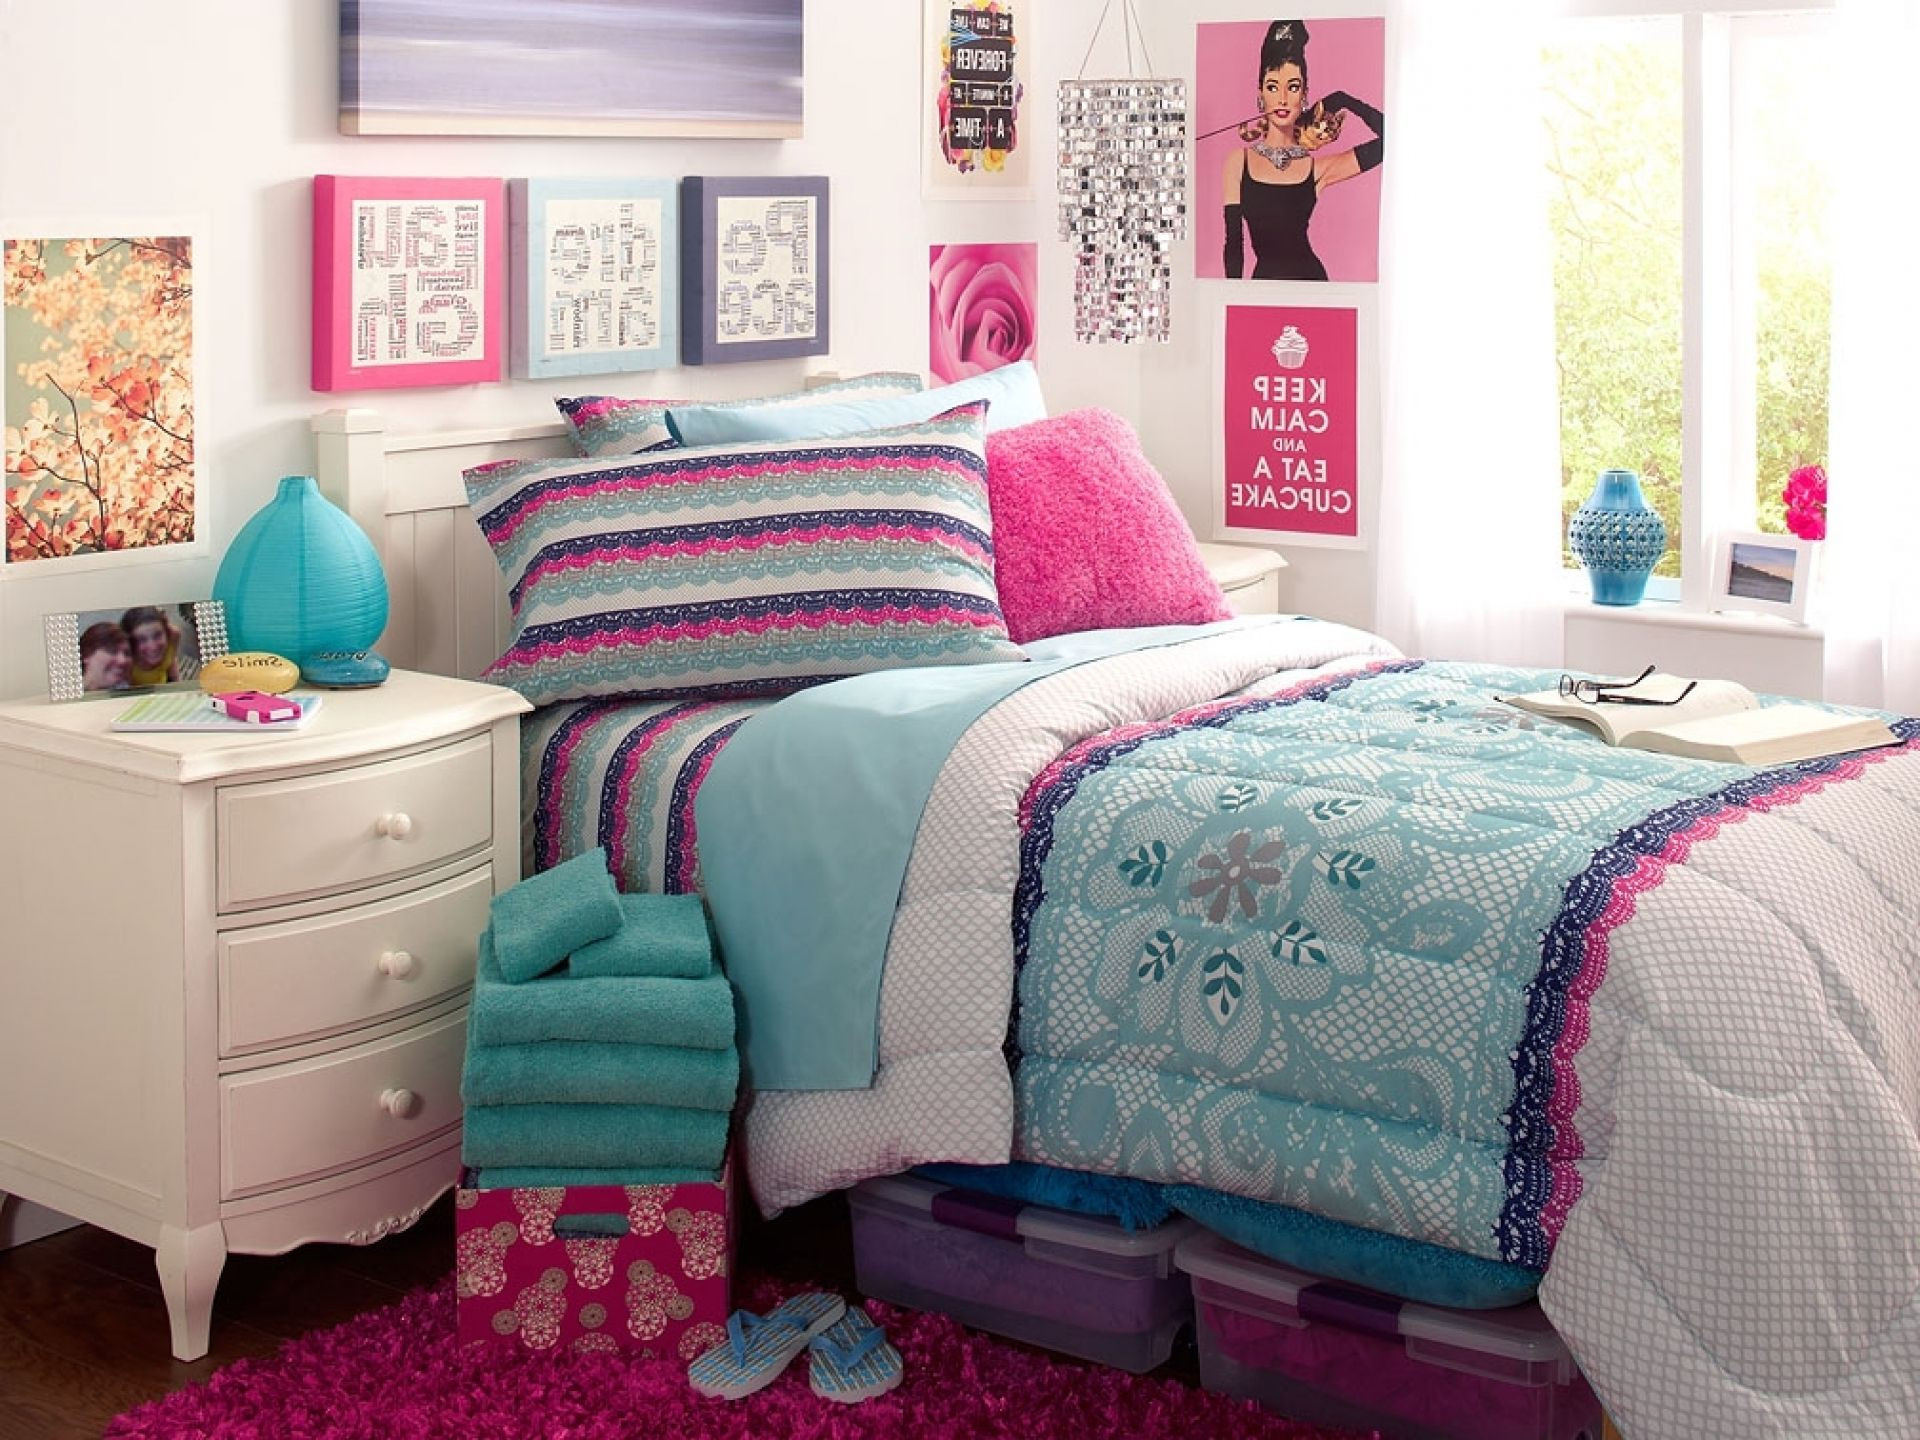 DIY Bedroom Decorating Ideas For Teens
 Some Helpful Tips and Inspiring Ideas for the DIY Project